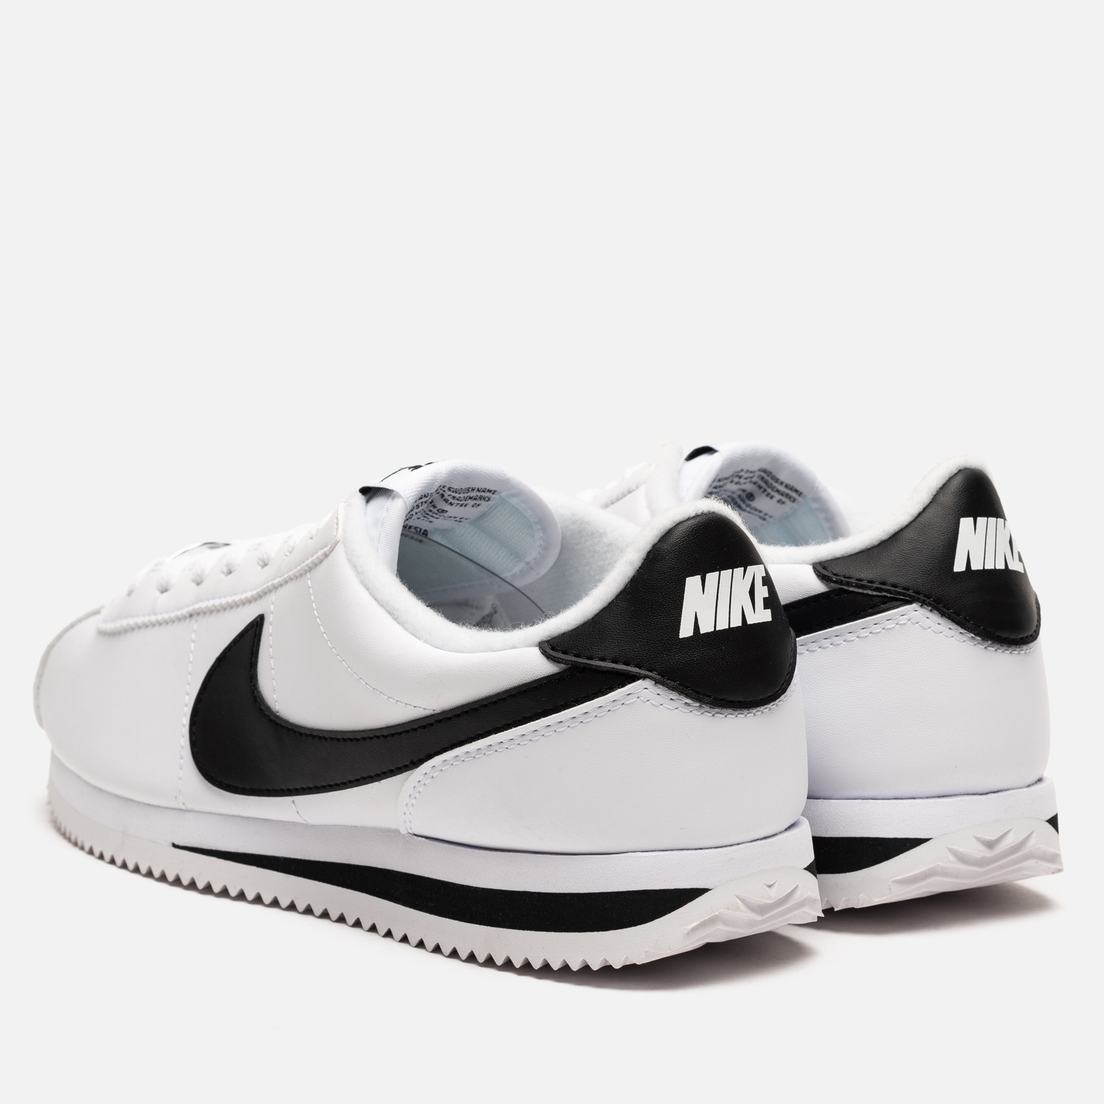 are nike cortez real leather